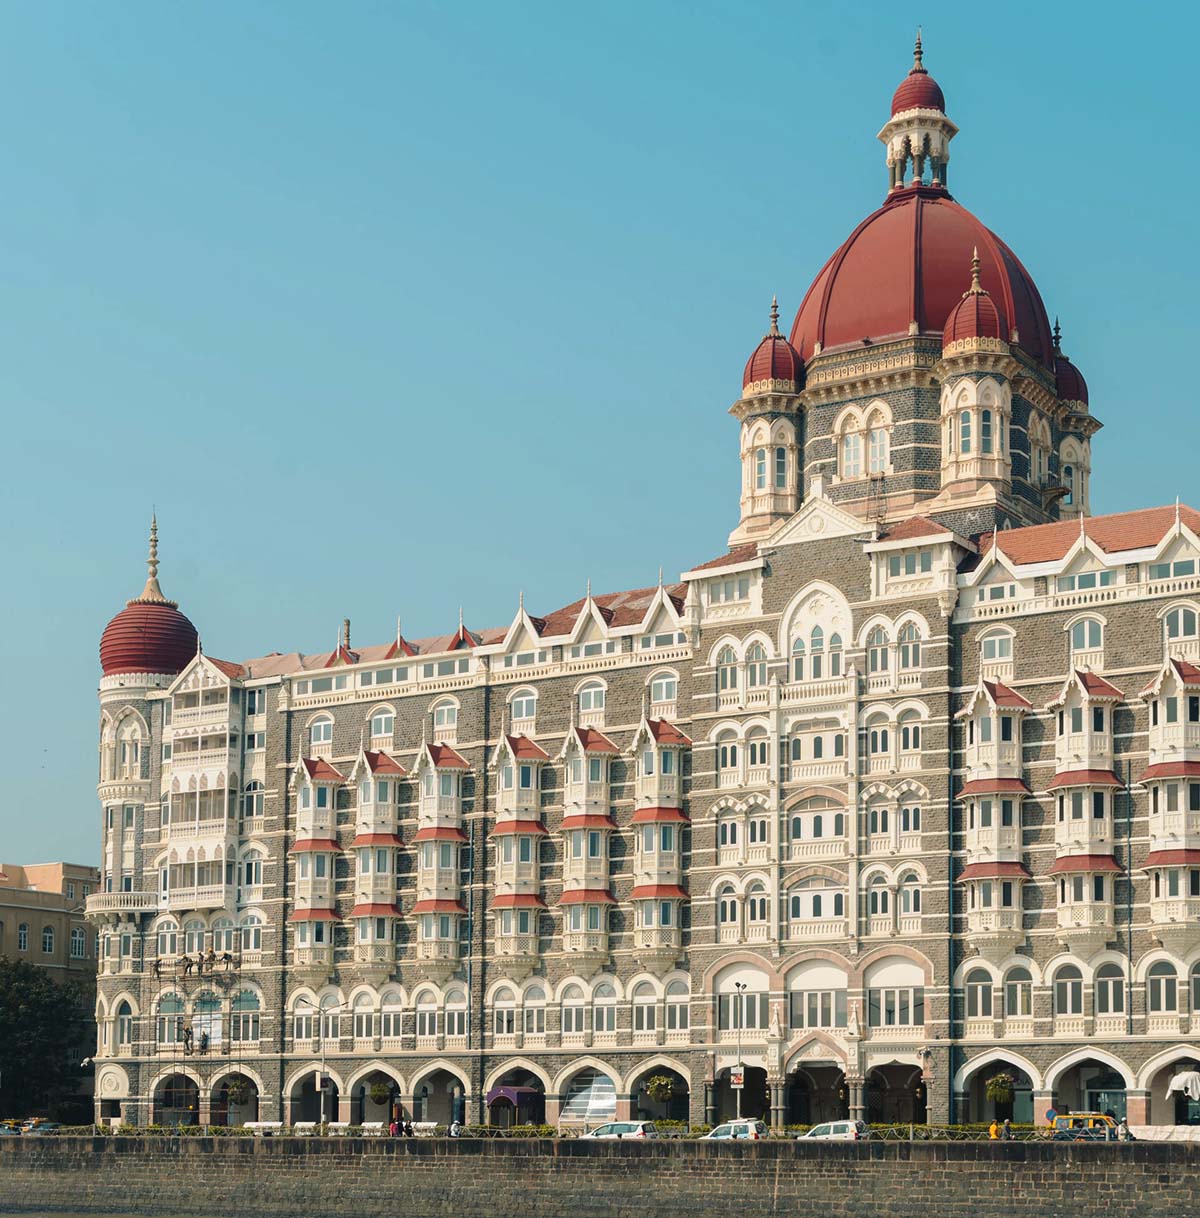 Taj Mahal Hotel, Mumbai, Which Was Attacked By Terrorists in 2008